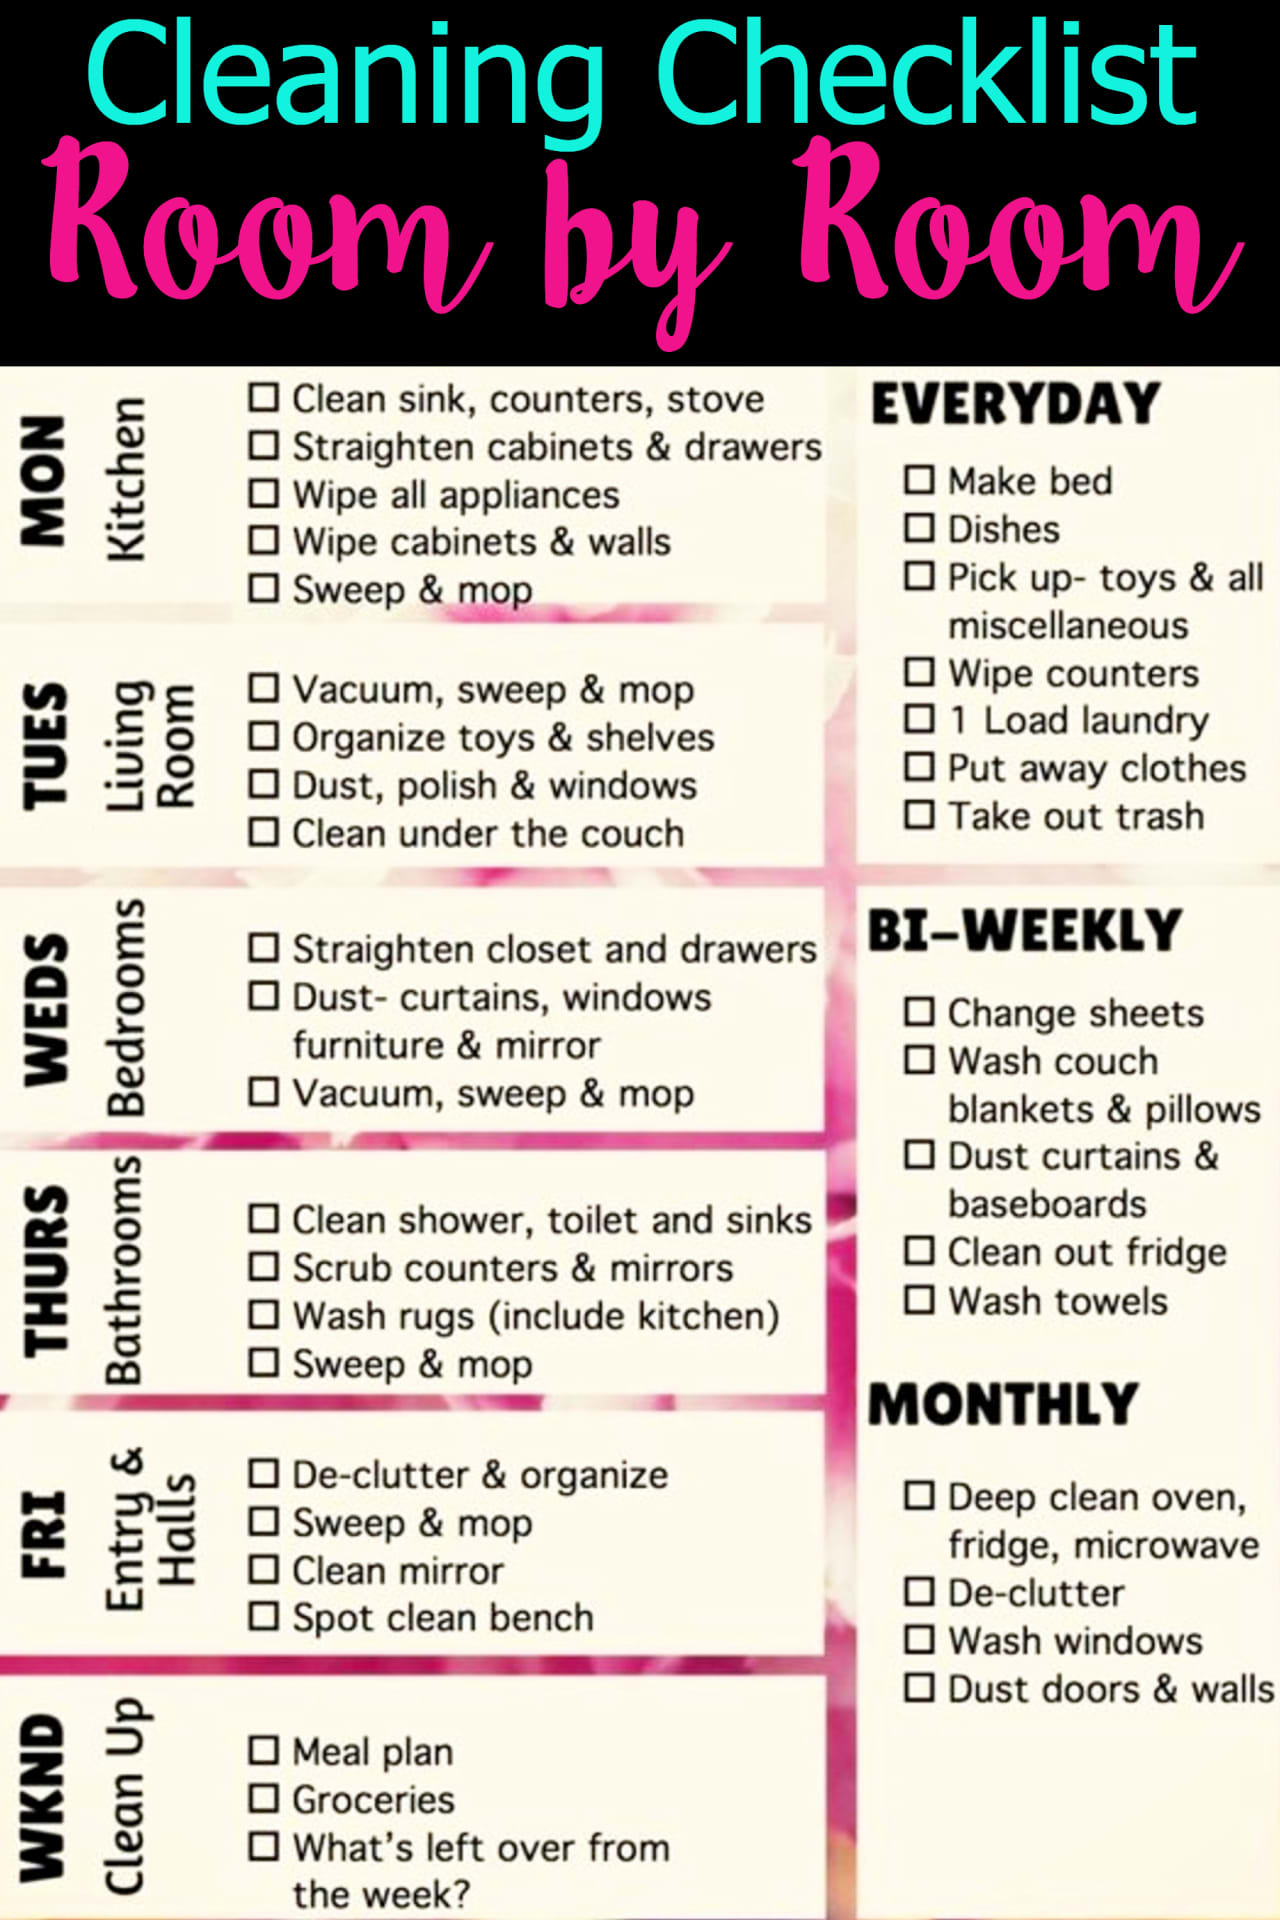 cleaning checklist by room - house cleaning schedules and charts